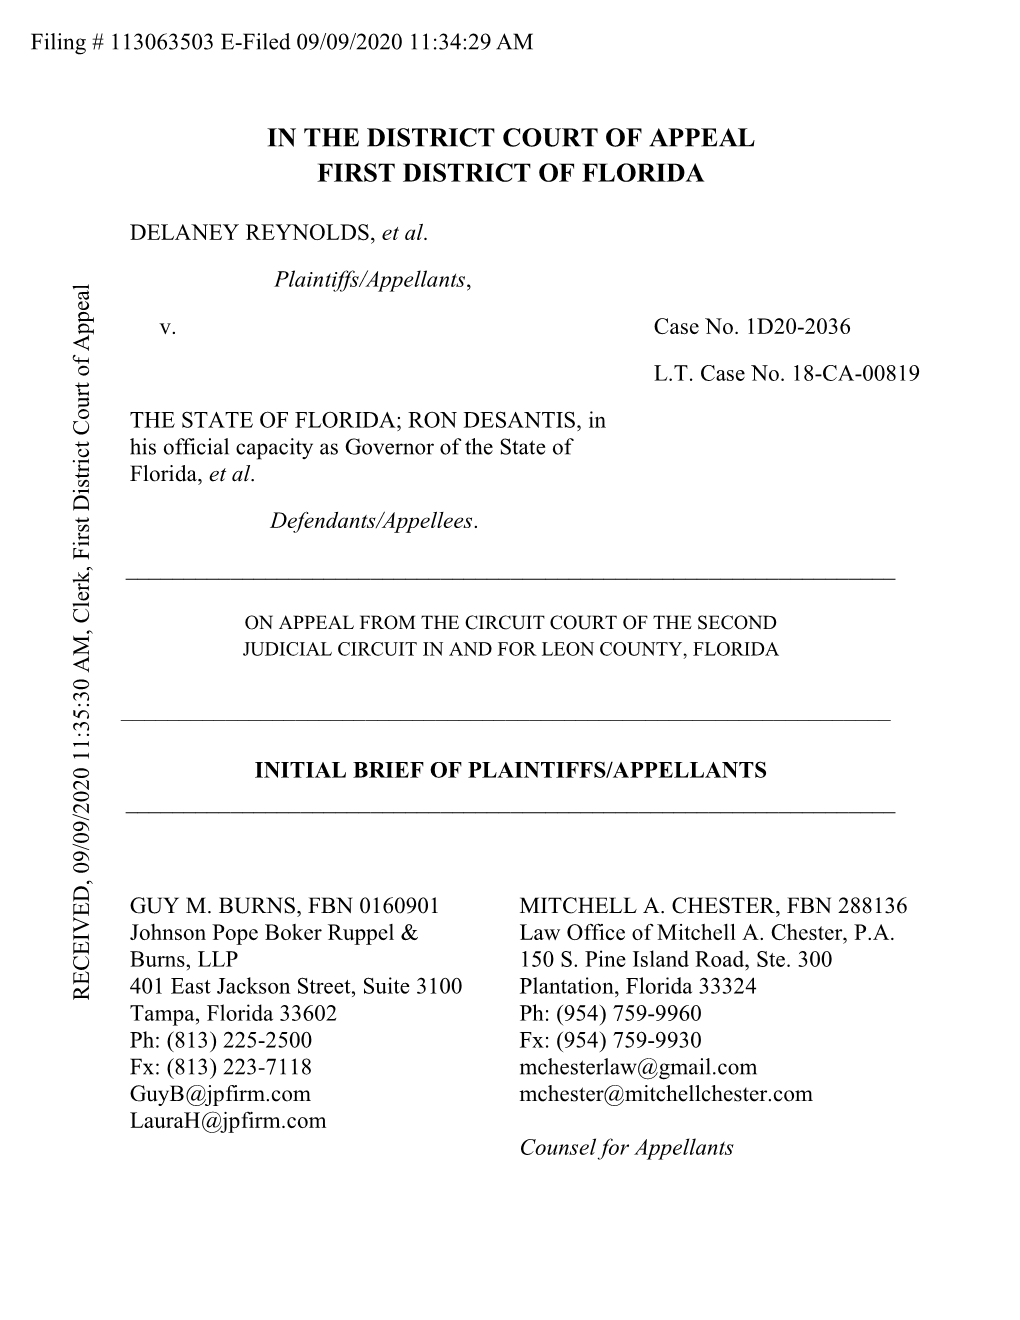 In the District Court of Appeal First District of Florida